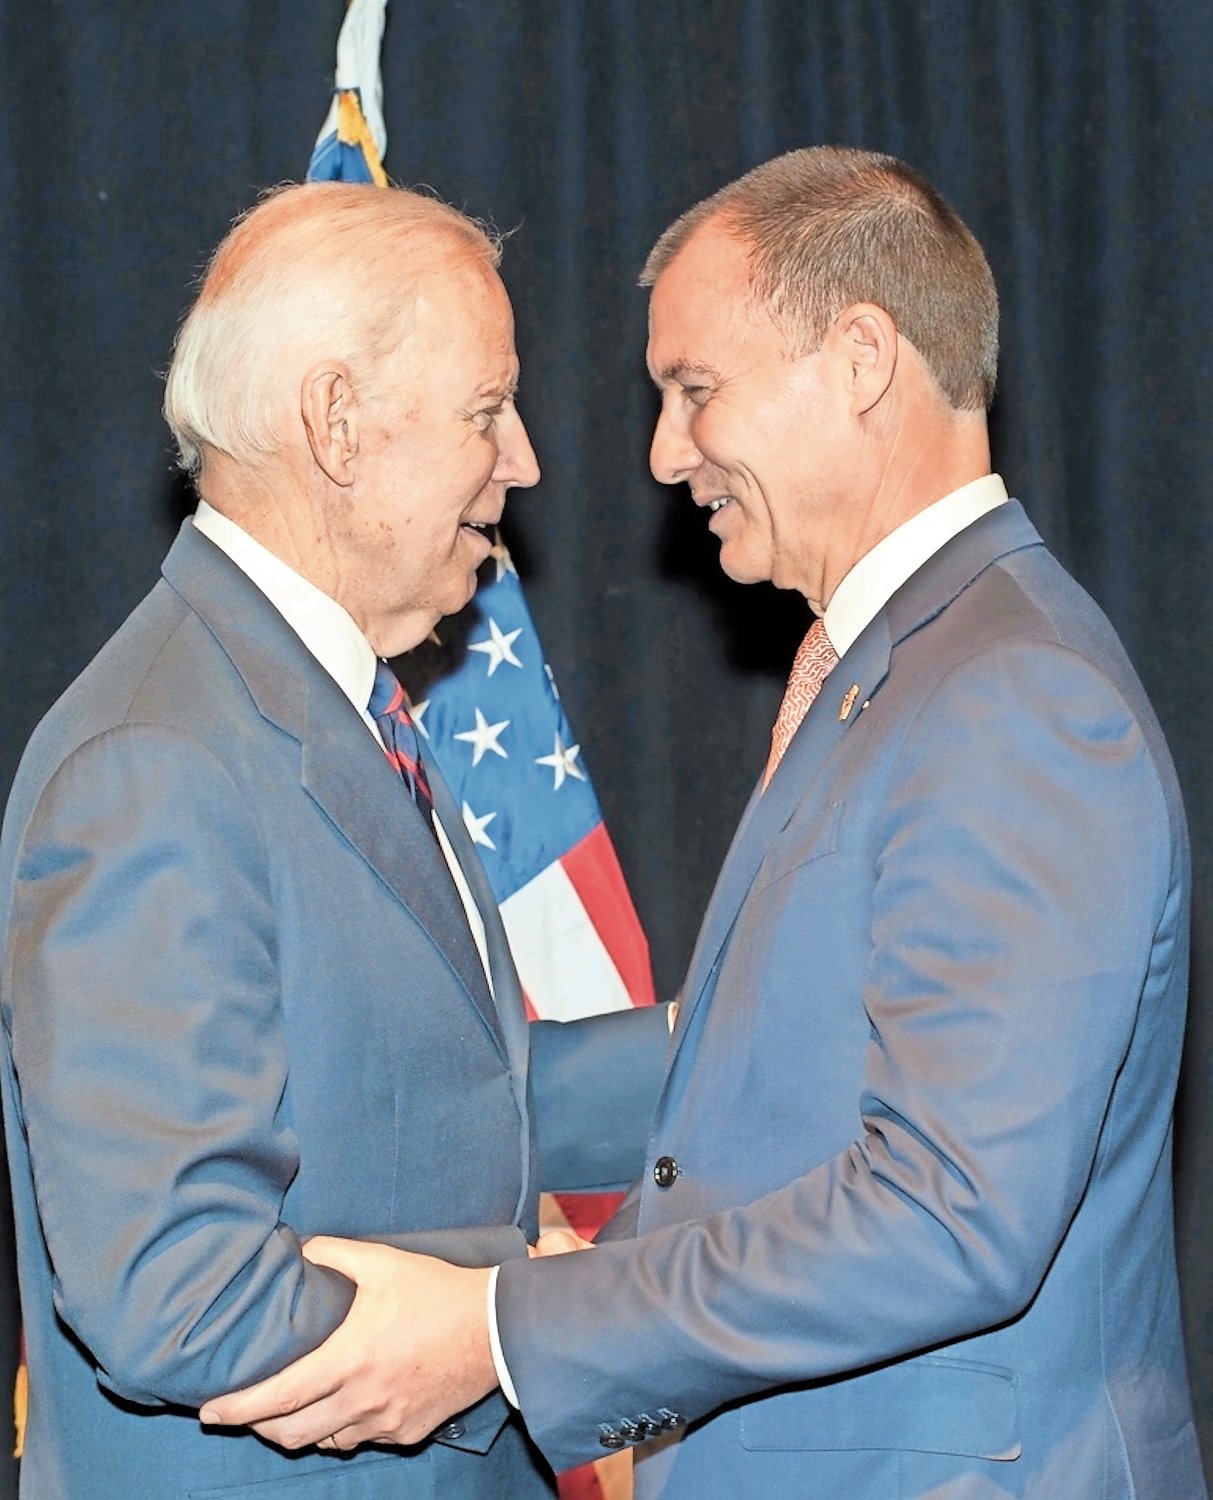 U.S. Rep. Tom Suozzi, right, endorsed former vice president Joe Biden's candidacy in the 2020 race for The White House.